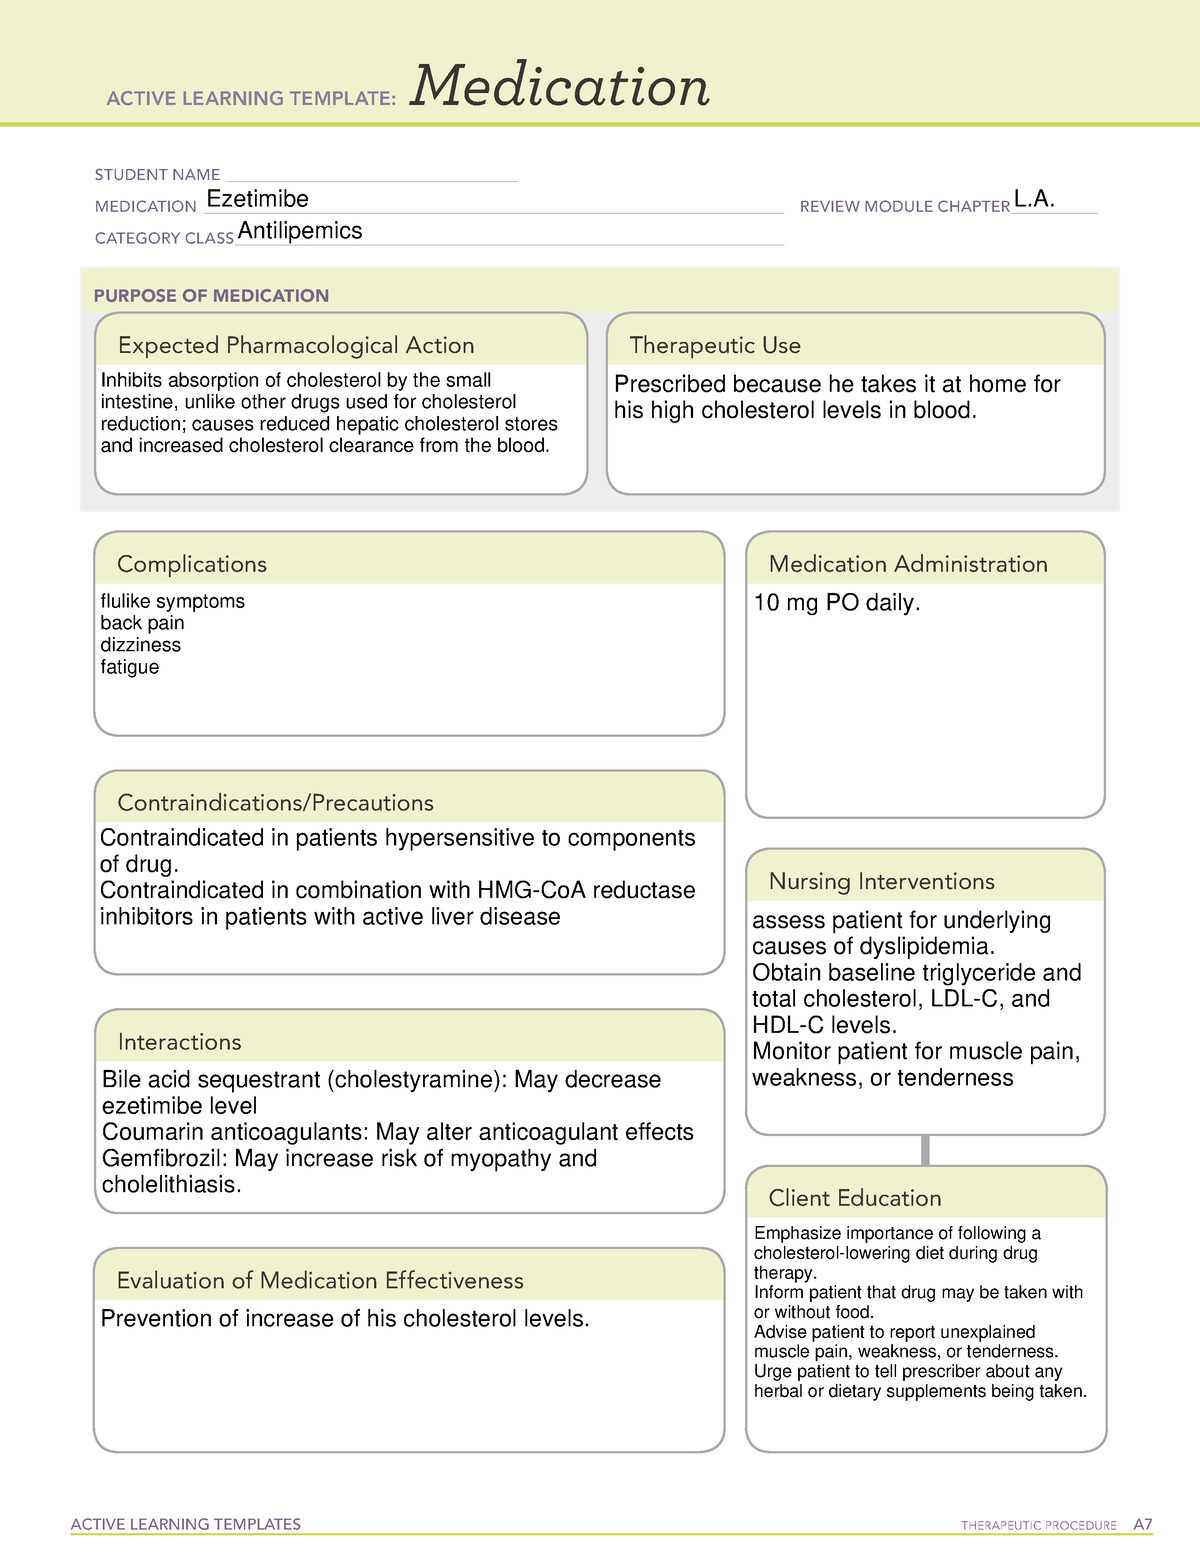 Ati medication form eztimibe ACTIVE LEARNING TEMPLATES THERAPEUTIC